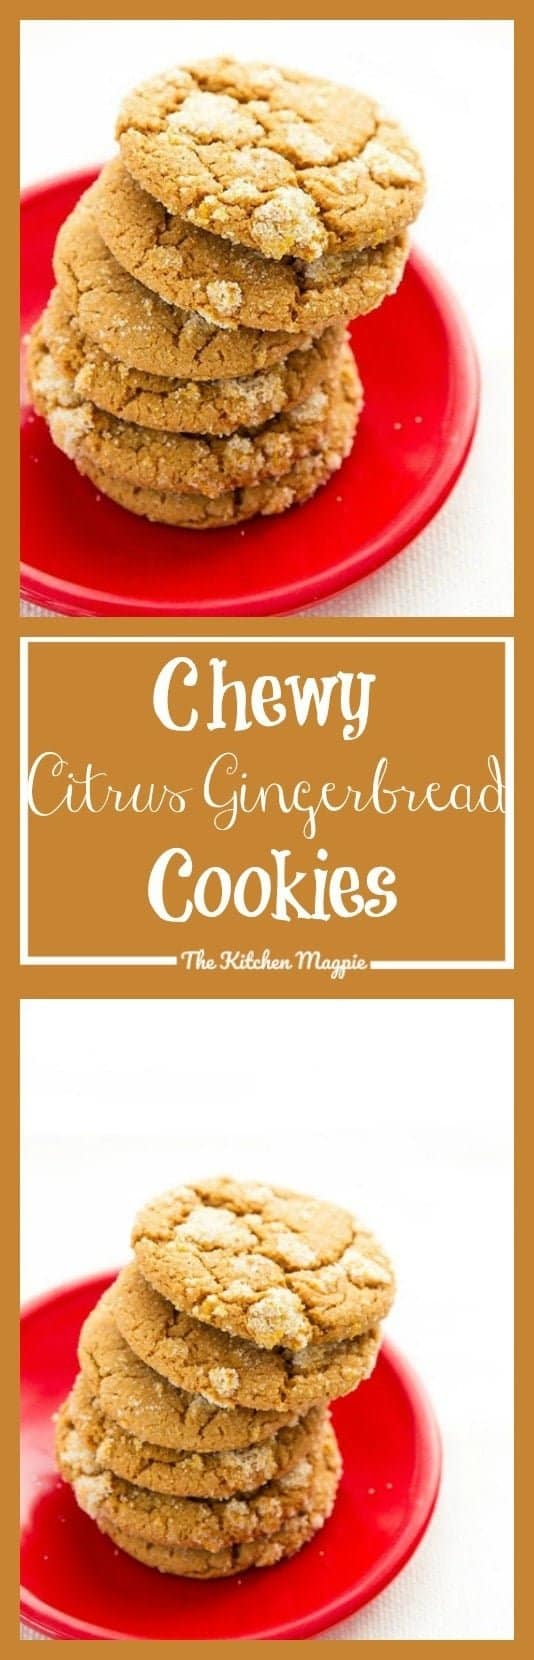 Chewy Citrus Gingerbread Cookies - The Kitchen Magpie